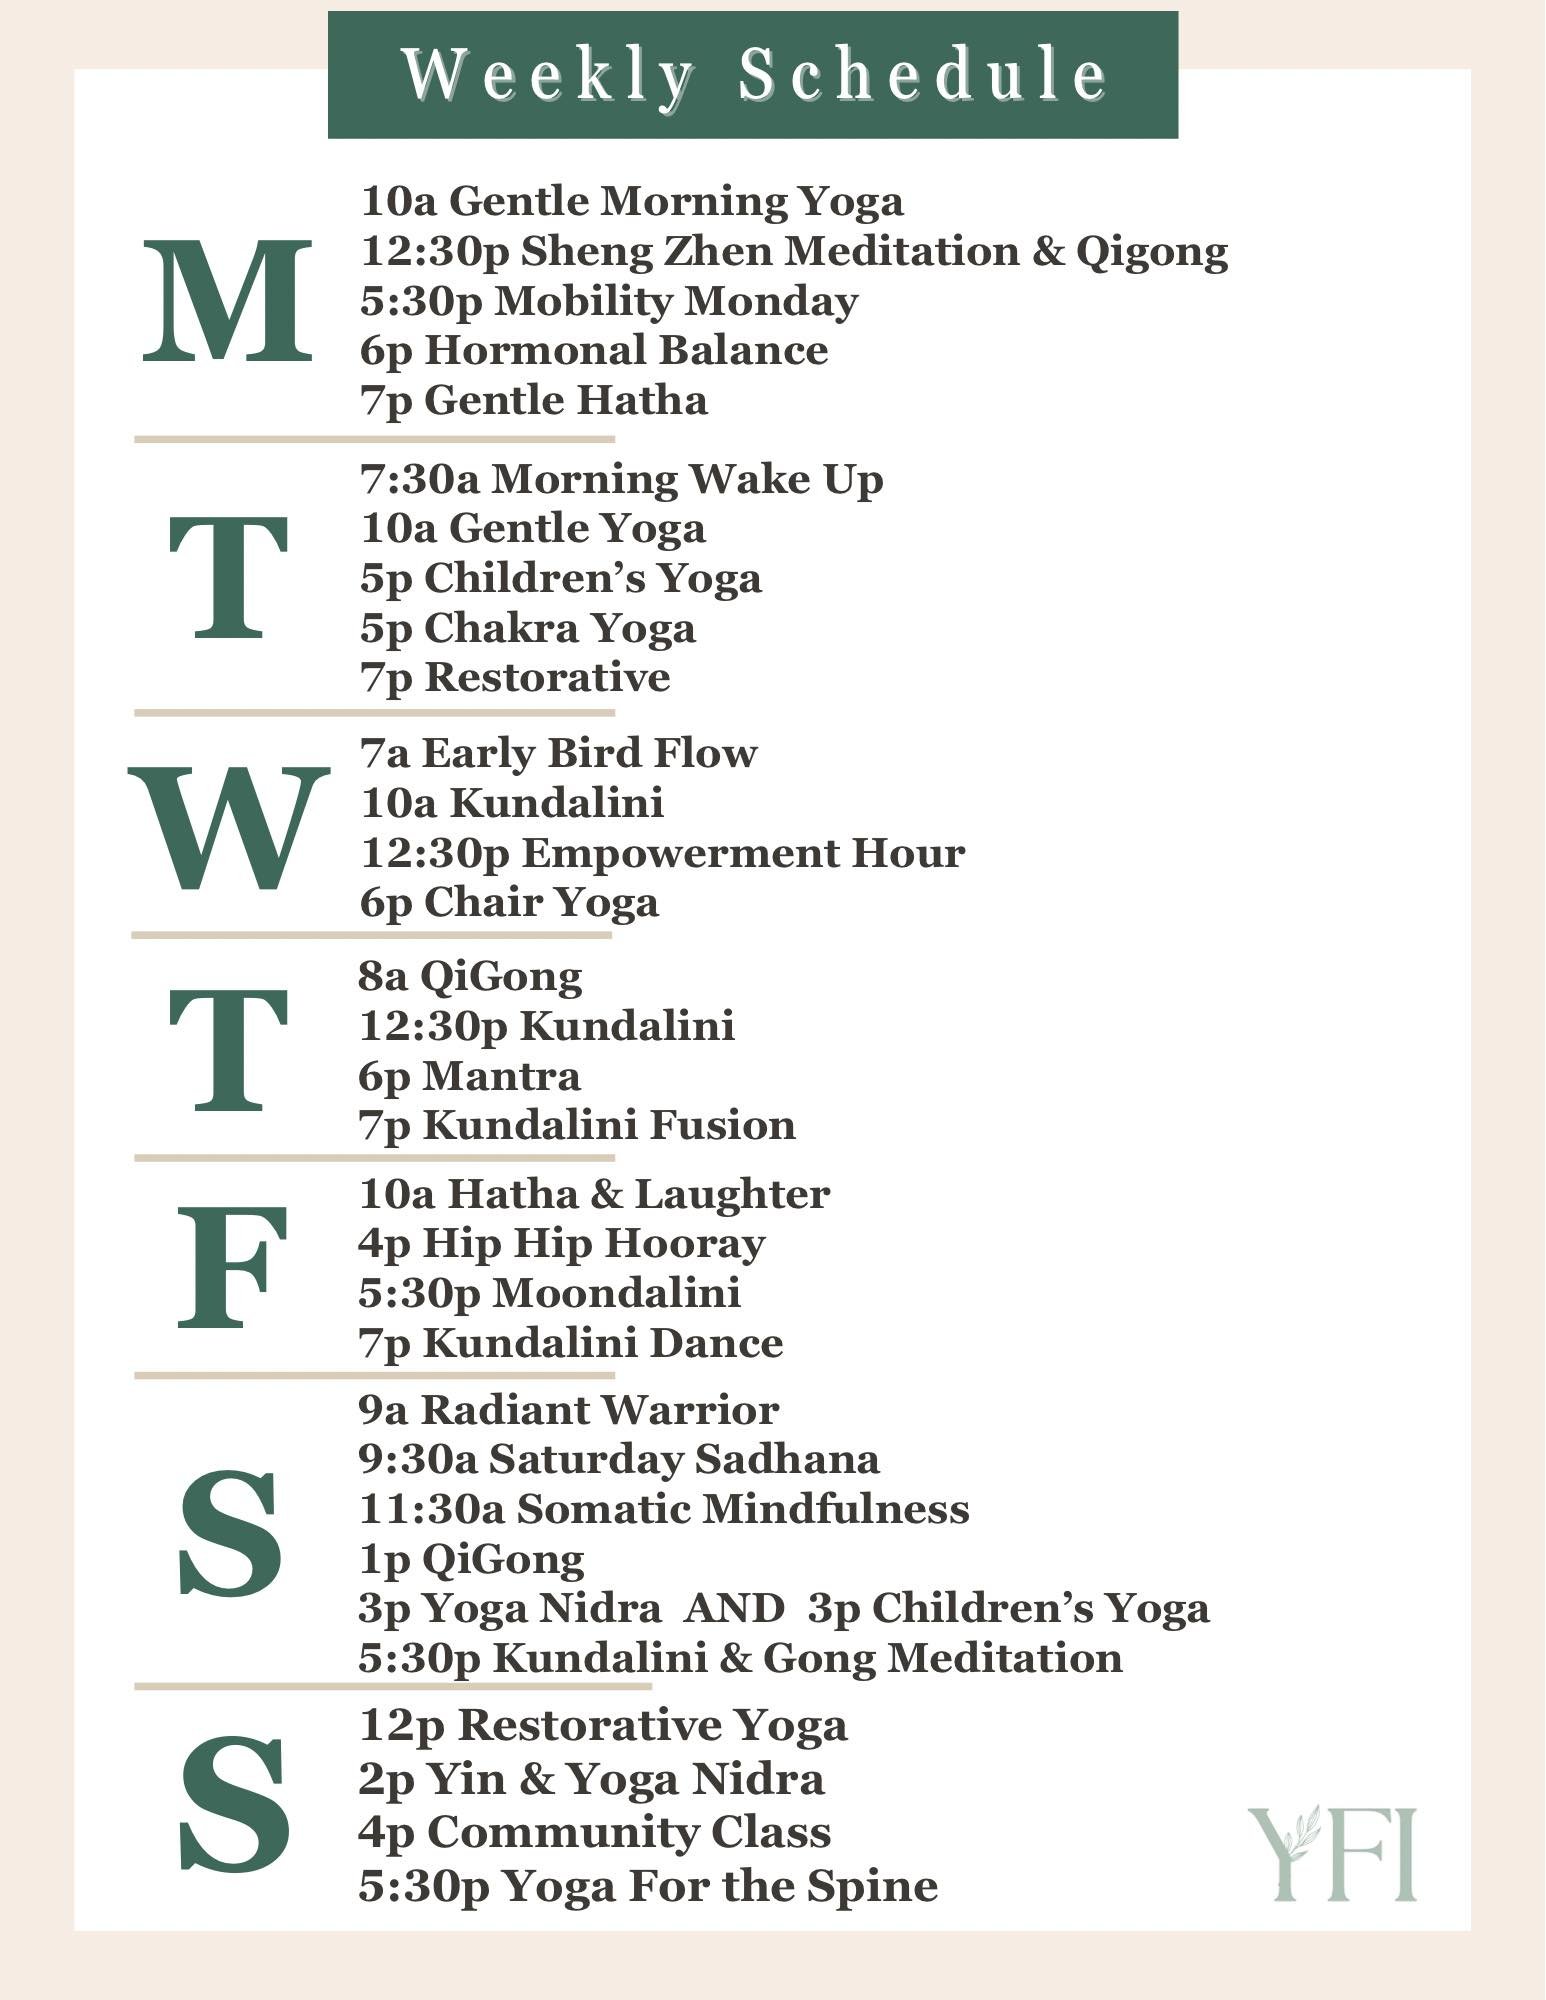 Good Morning! #Ithaca locals check out our weekly schedule and remaining events in April at the studio!

Don&rsquo;t miss Kirtan and Gong Meditation today! 🌟